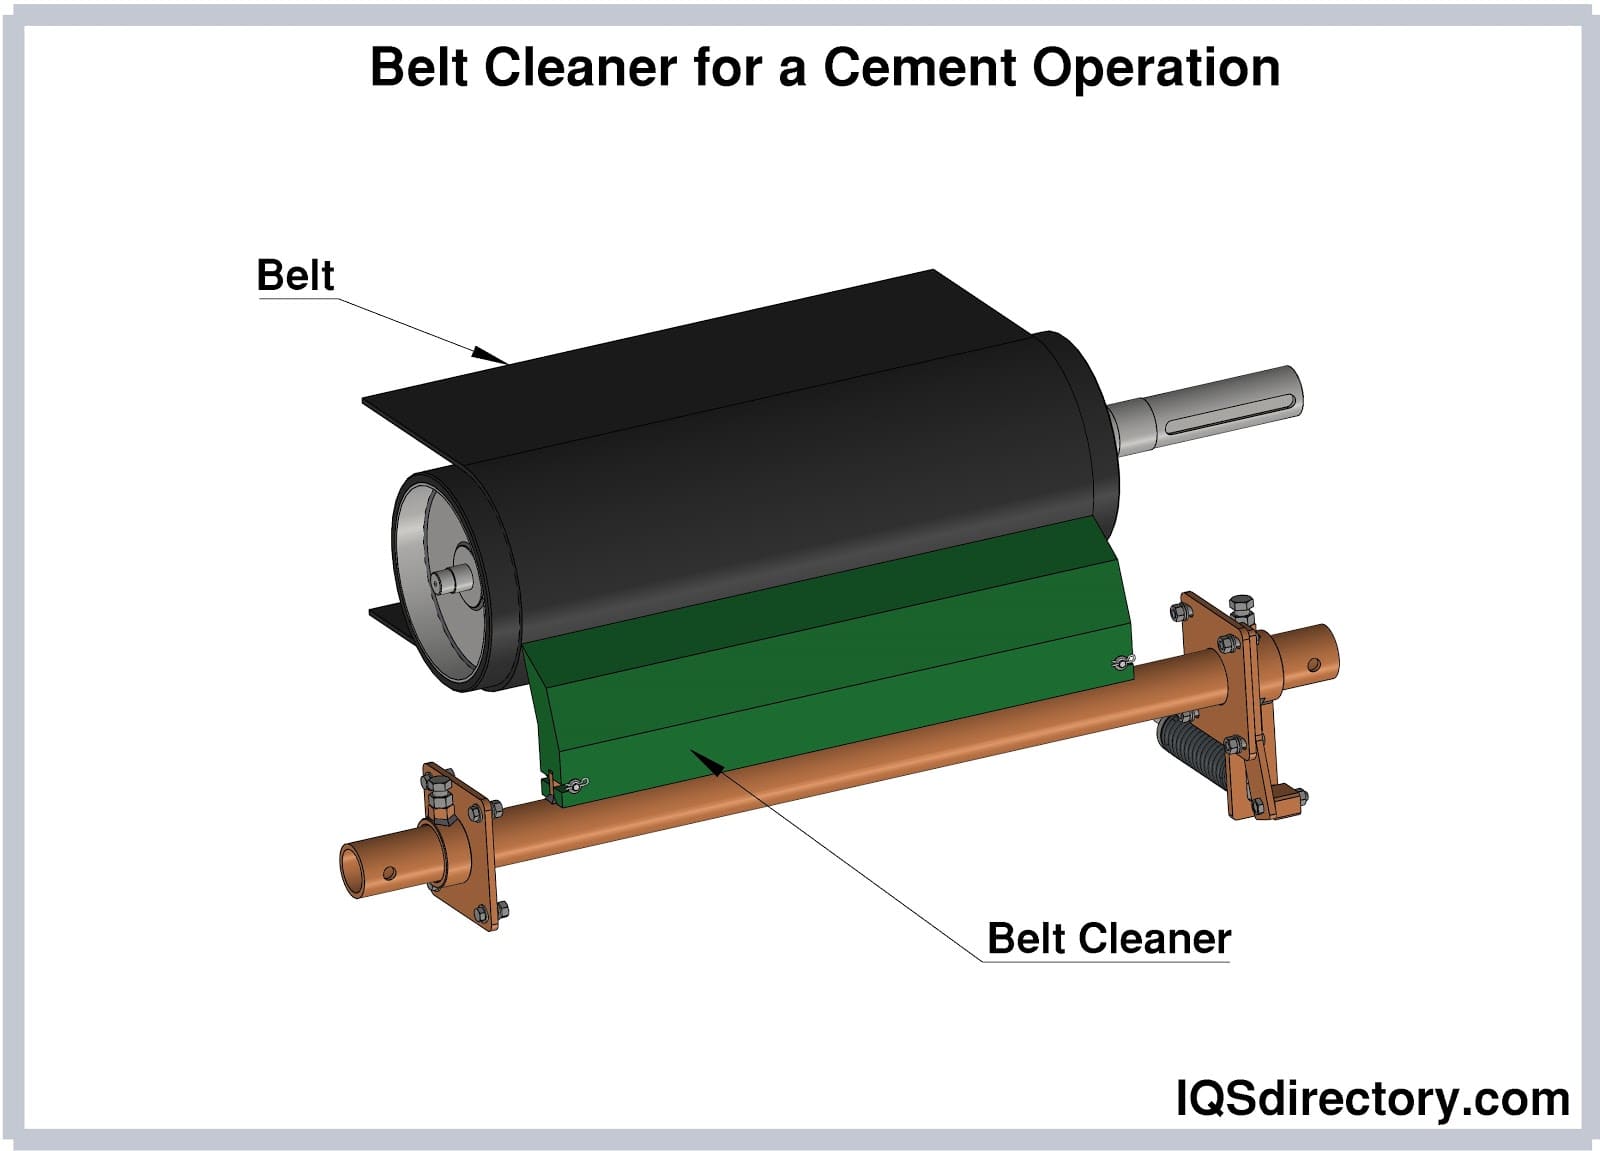 Belt Cleaner for a Cement Operation